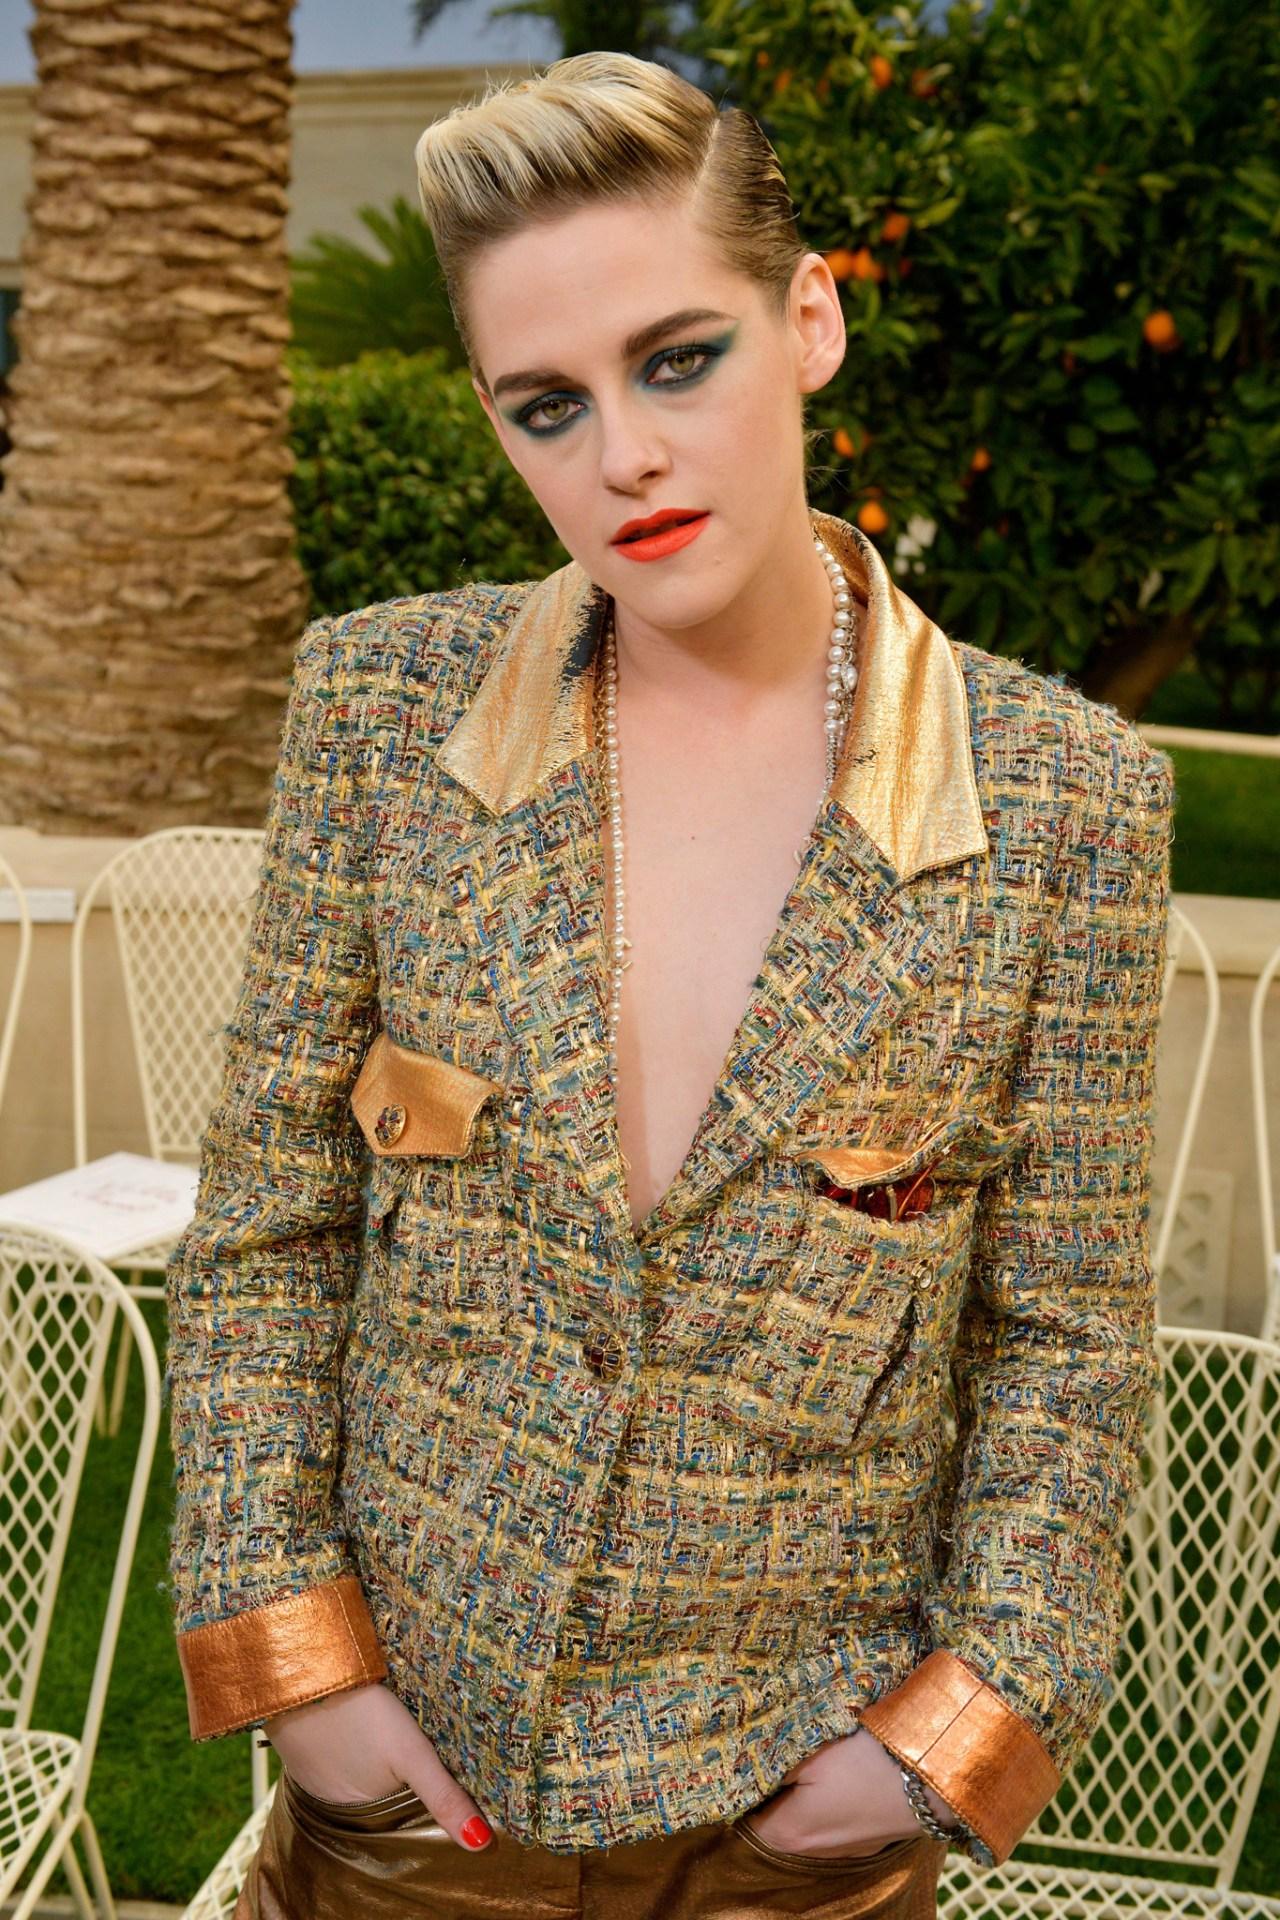 As seen on Kristen Stewart! Bestseller of the Collection
Absolutely stunning Chanel jacket made of the most beautiful and expensive Lesage tweed : from Runway of Paris / New-York / EGYPT 2019 Collection, Metiers d'Art
- CC logo jewel Gripoix